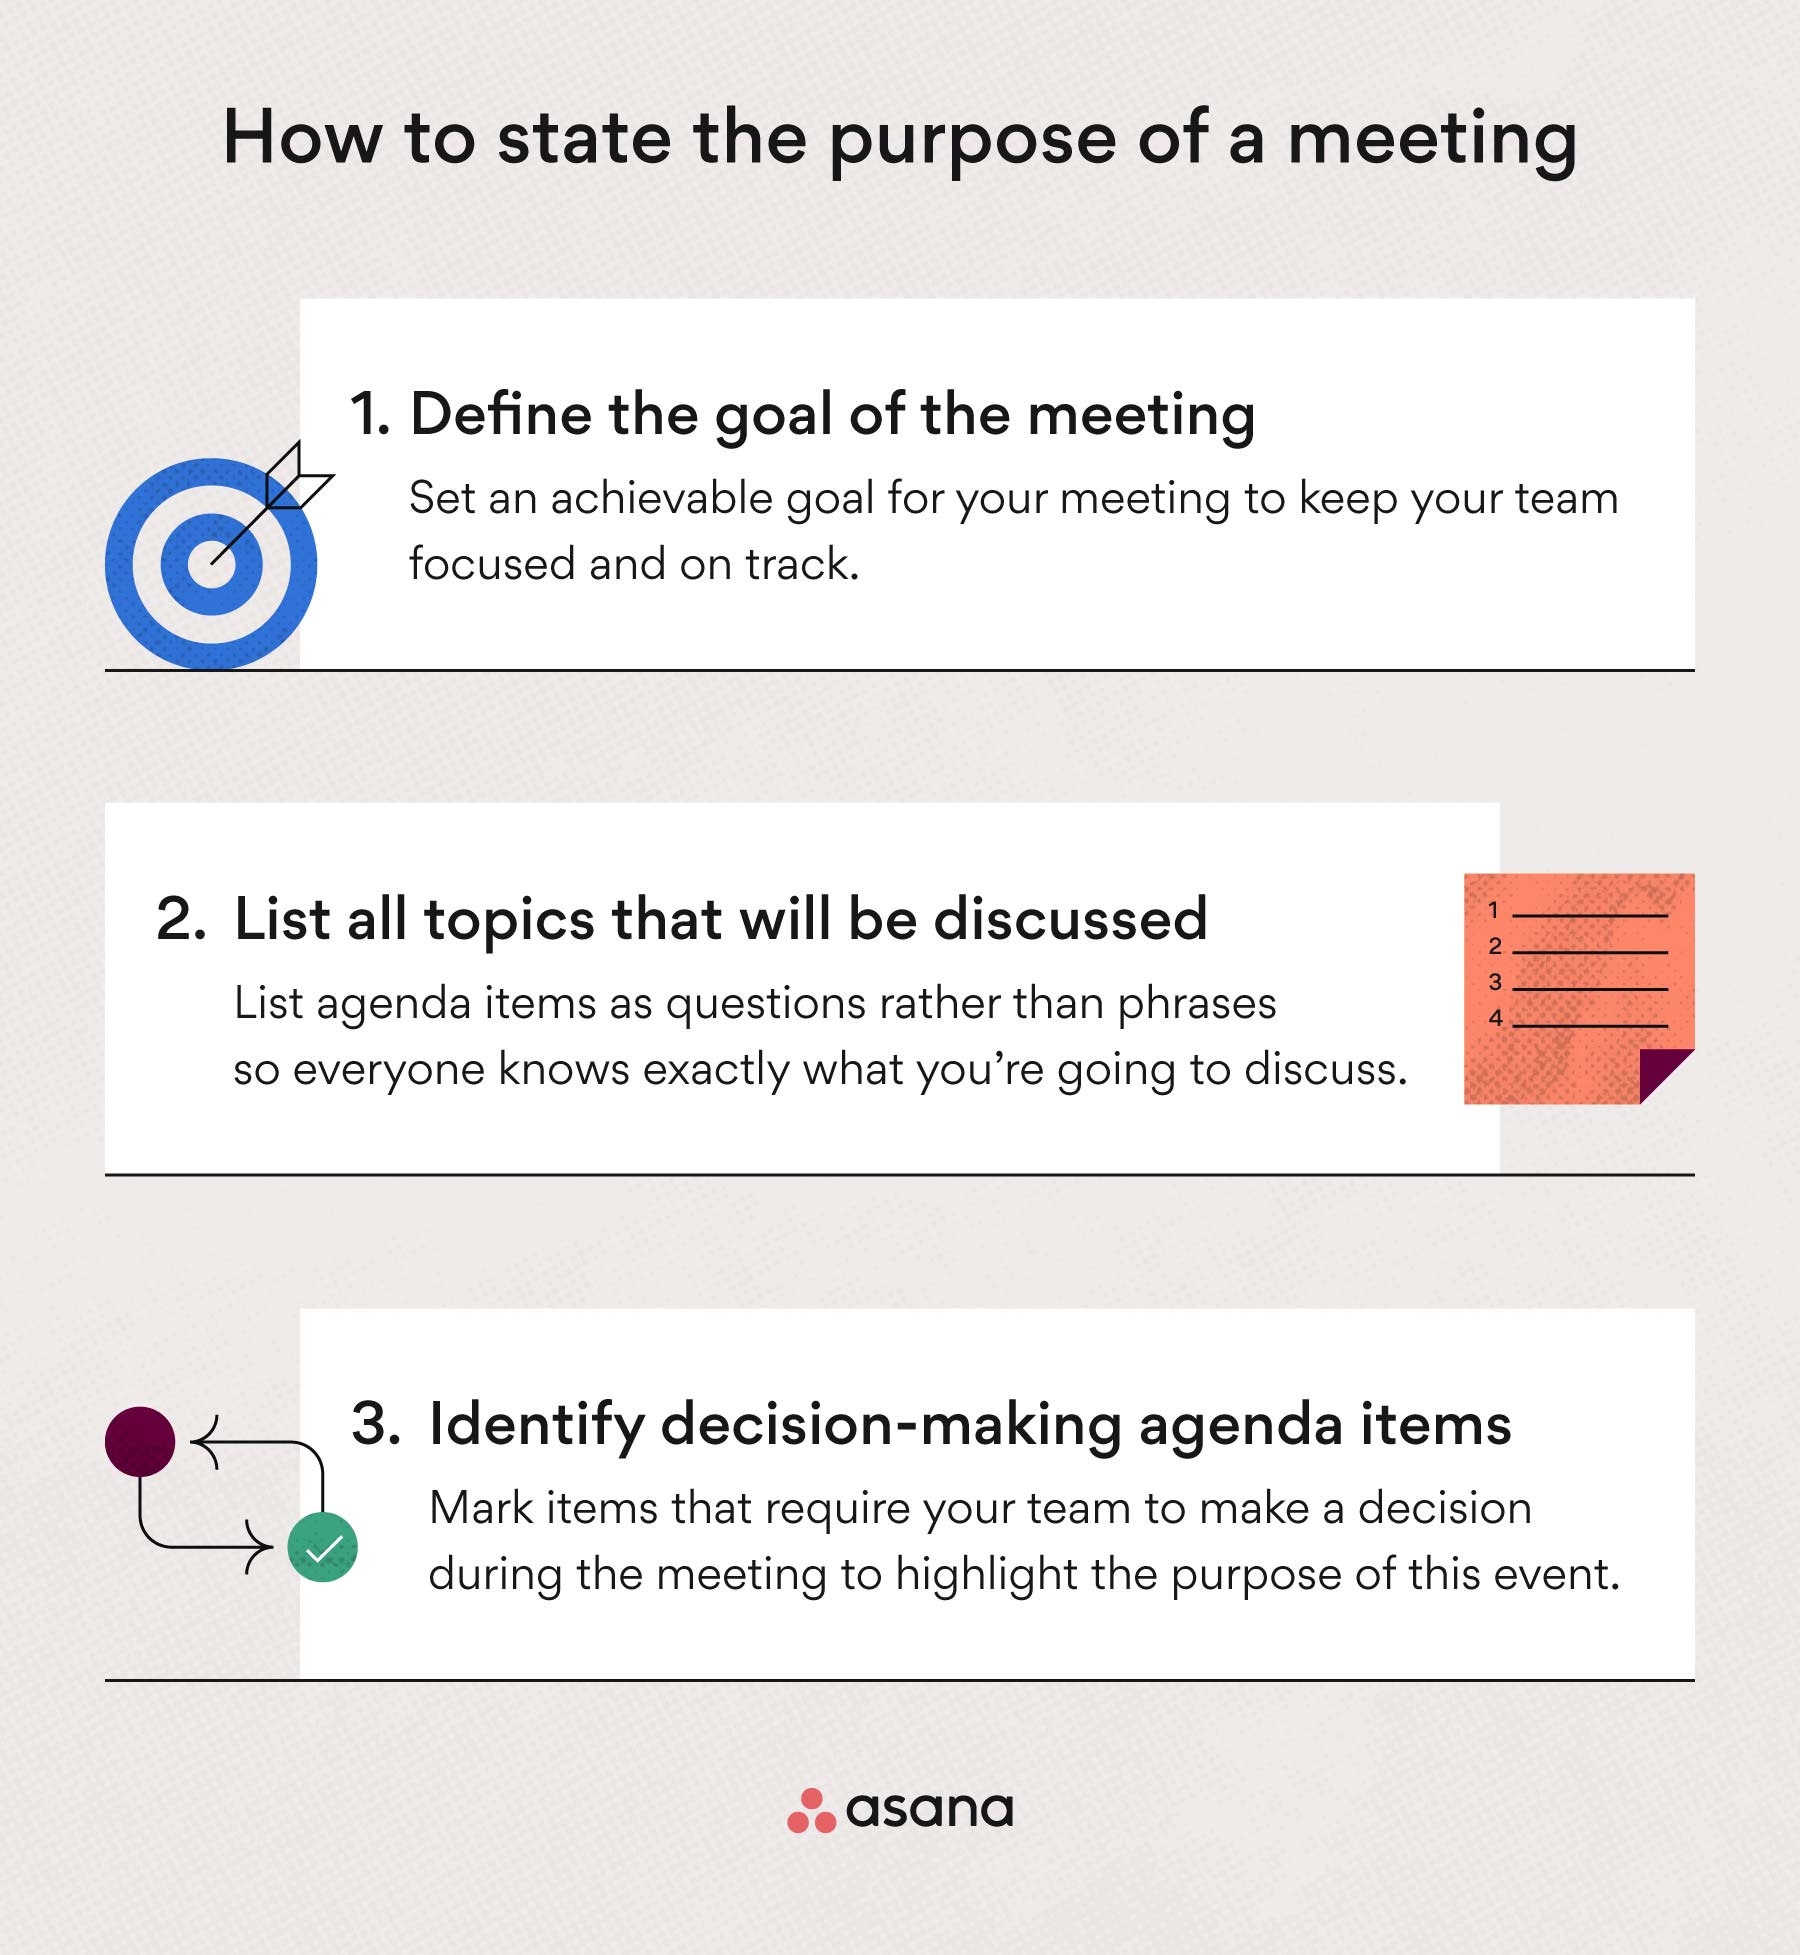 how to state the purpose of a meeting in an agenda